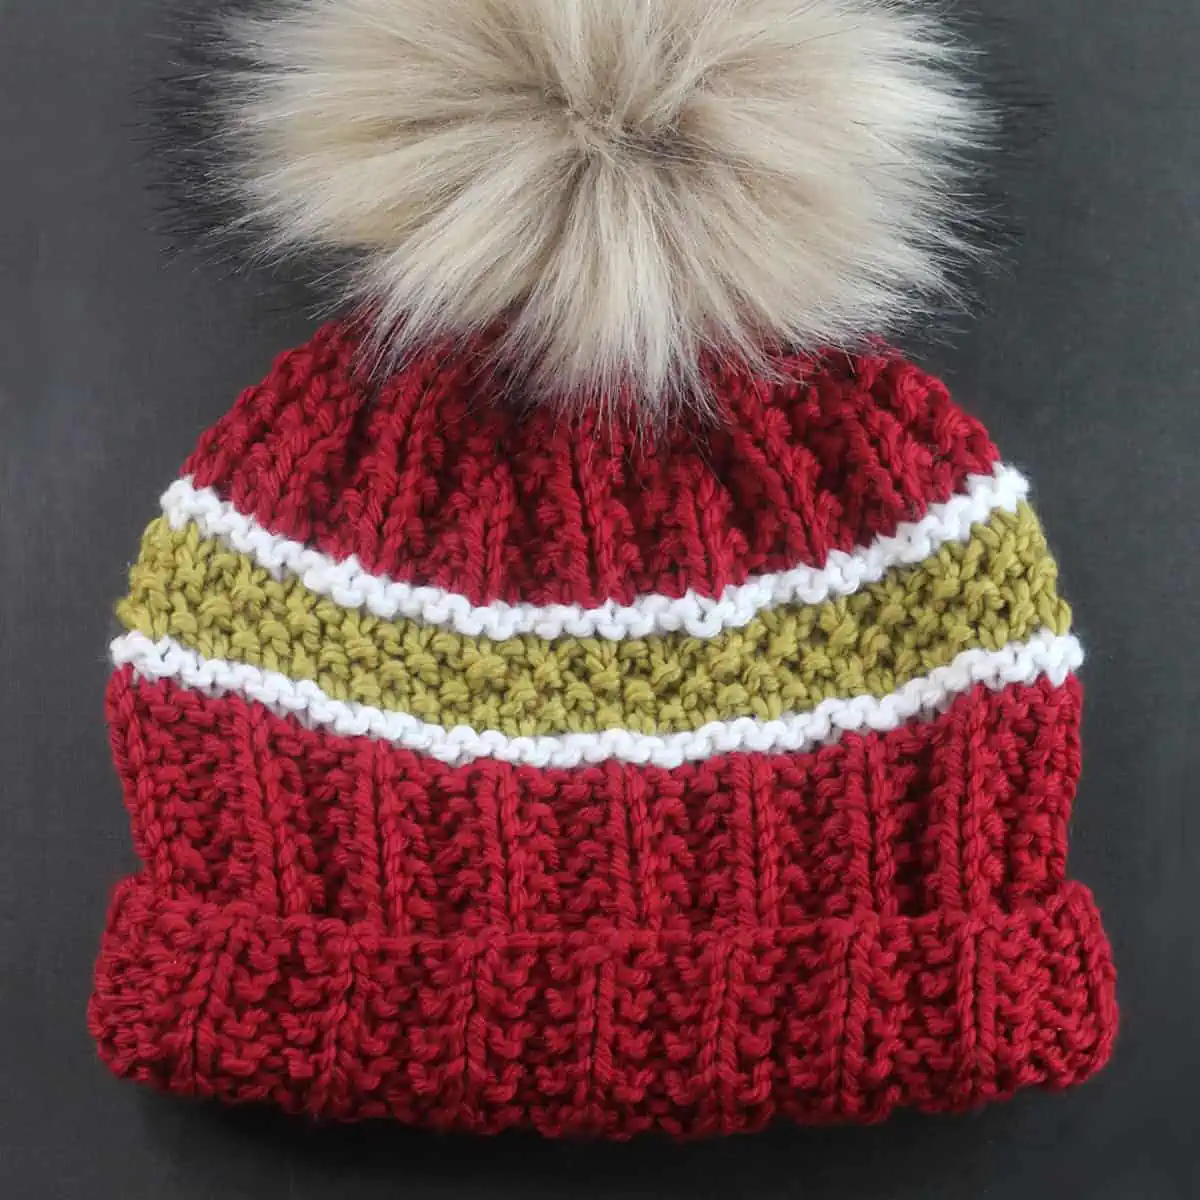 Knitted beanie in red, gold, and white colors with faux fur pom pom.